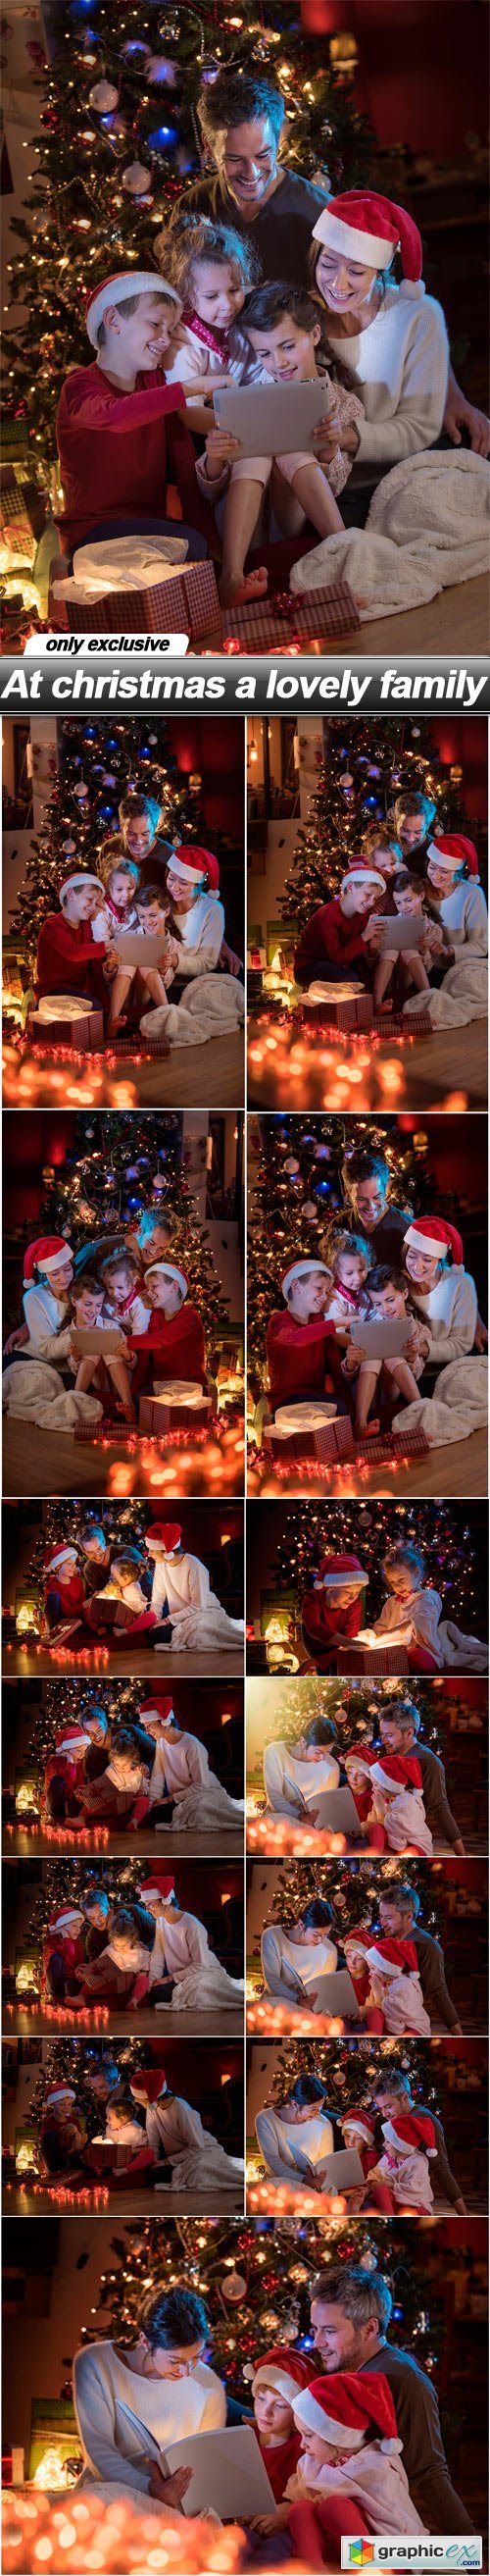 At christmas a lovely family - 13 UHQ JPEG